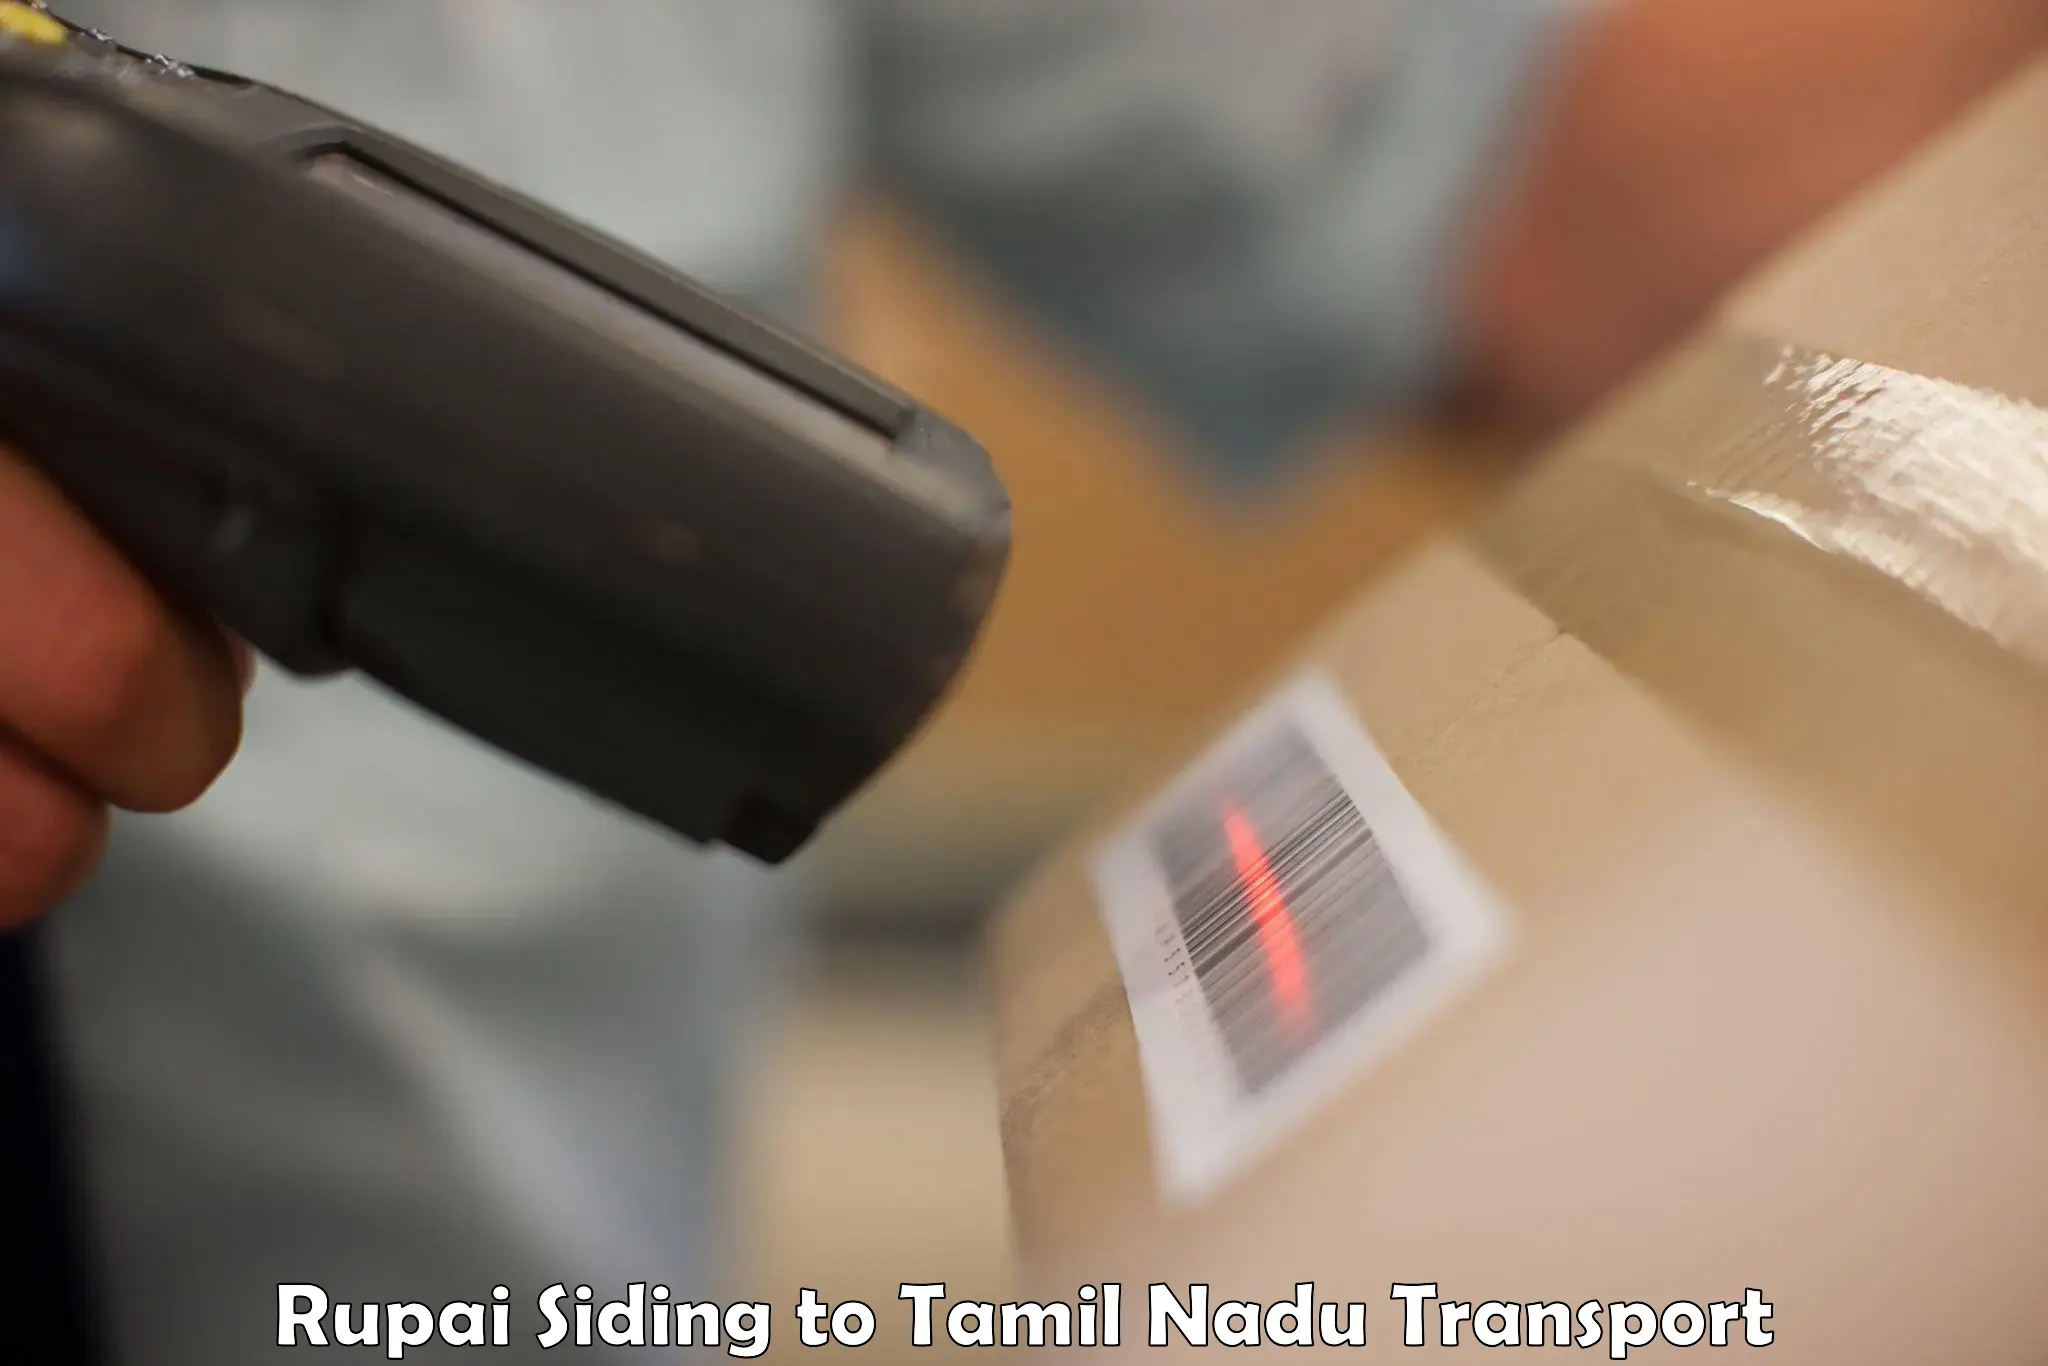 Interstate transport services Rupai Siding to Vellore Institute of Technology